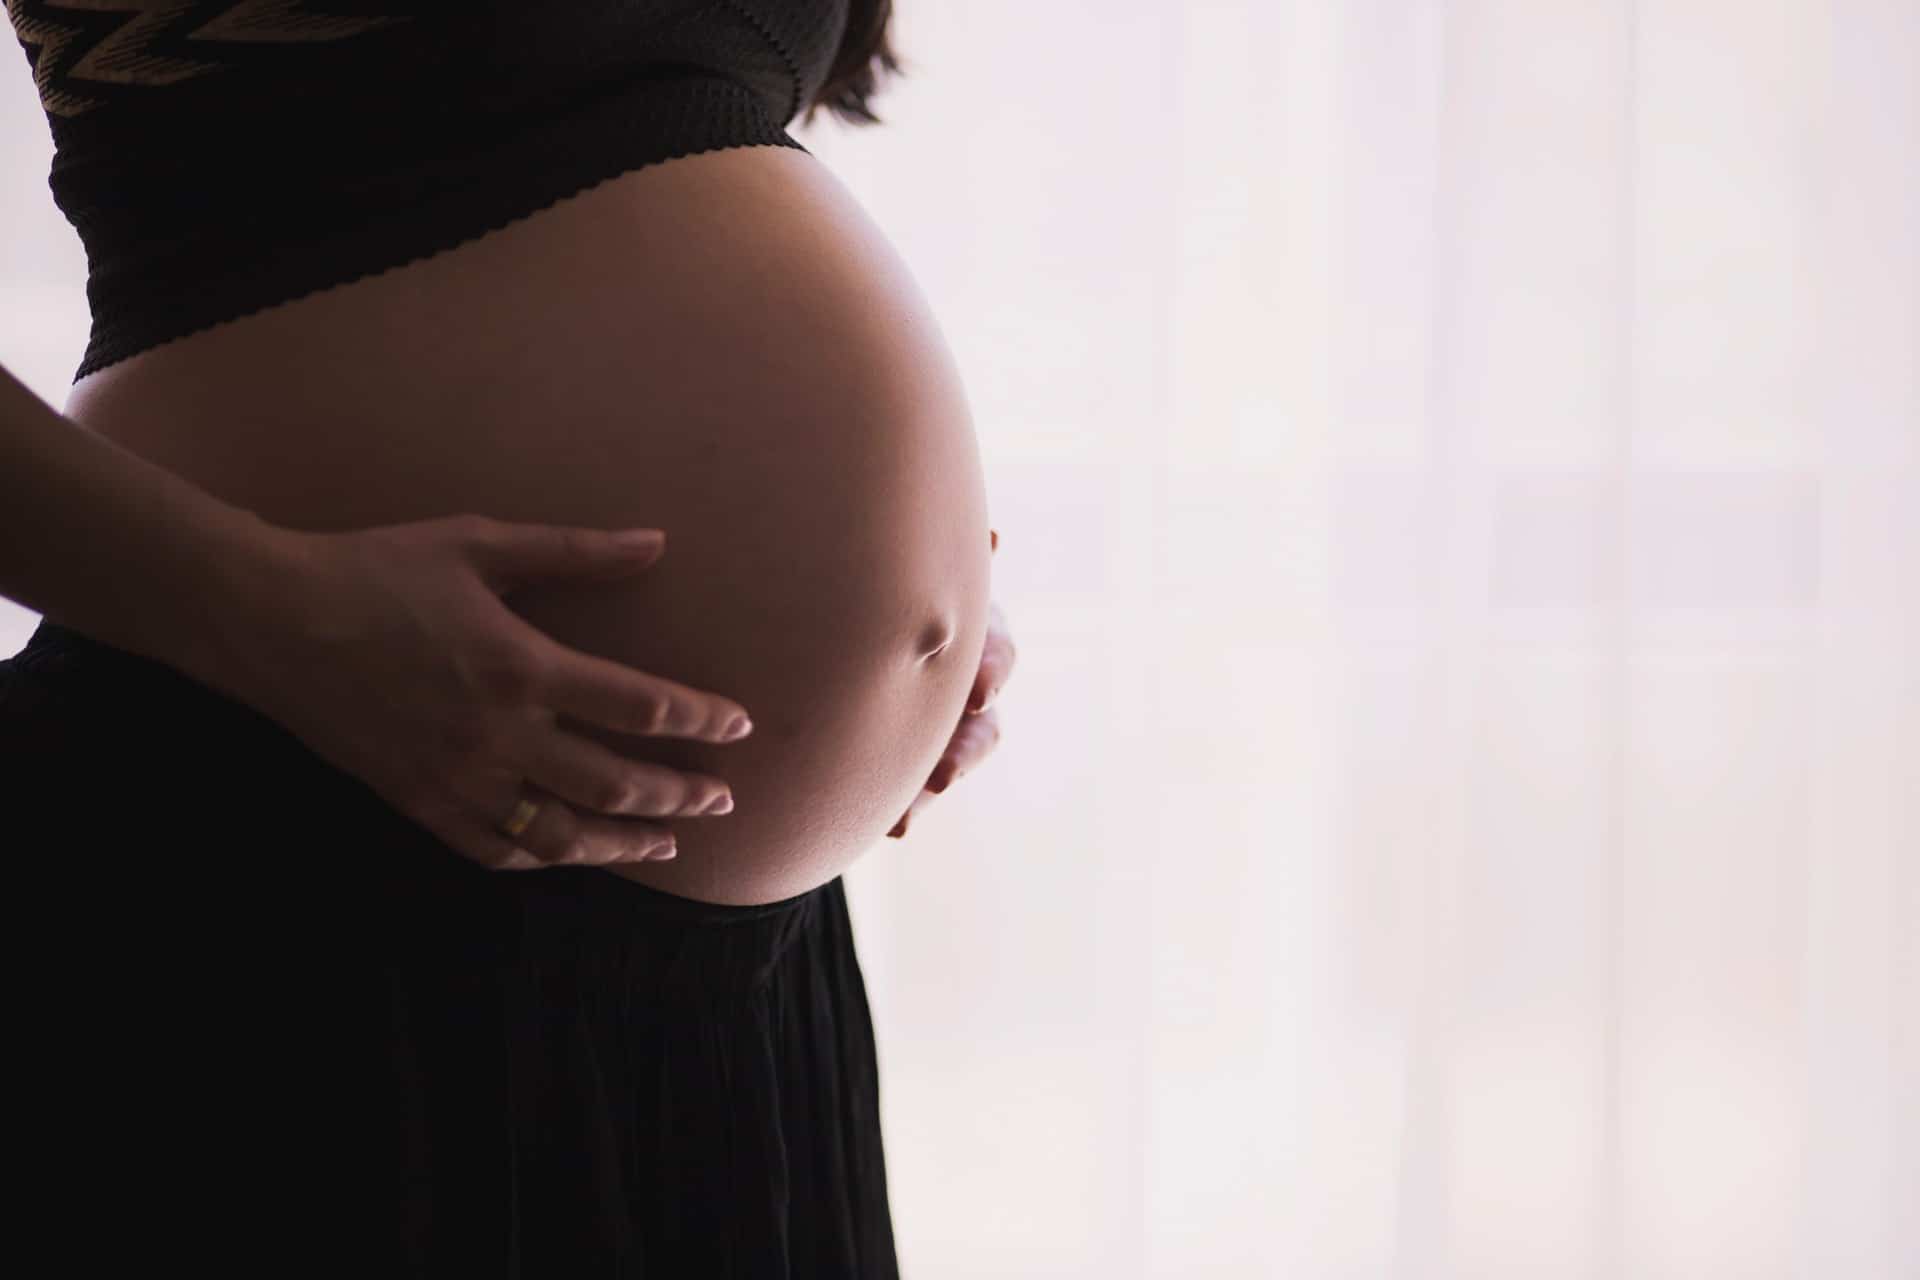 New Study Reveals 1 in 4 Pregnancy Deaths are Caused by Cardiovascular Complications